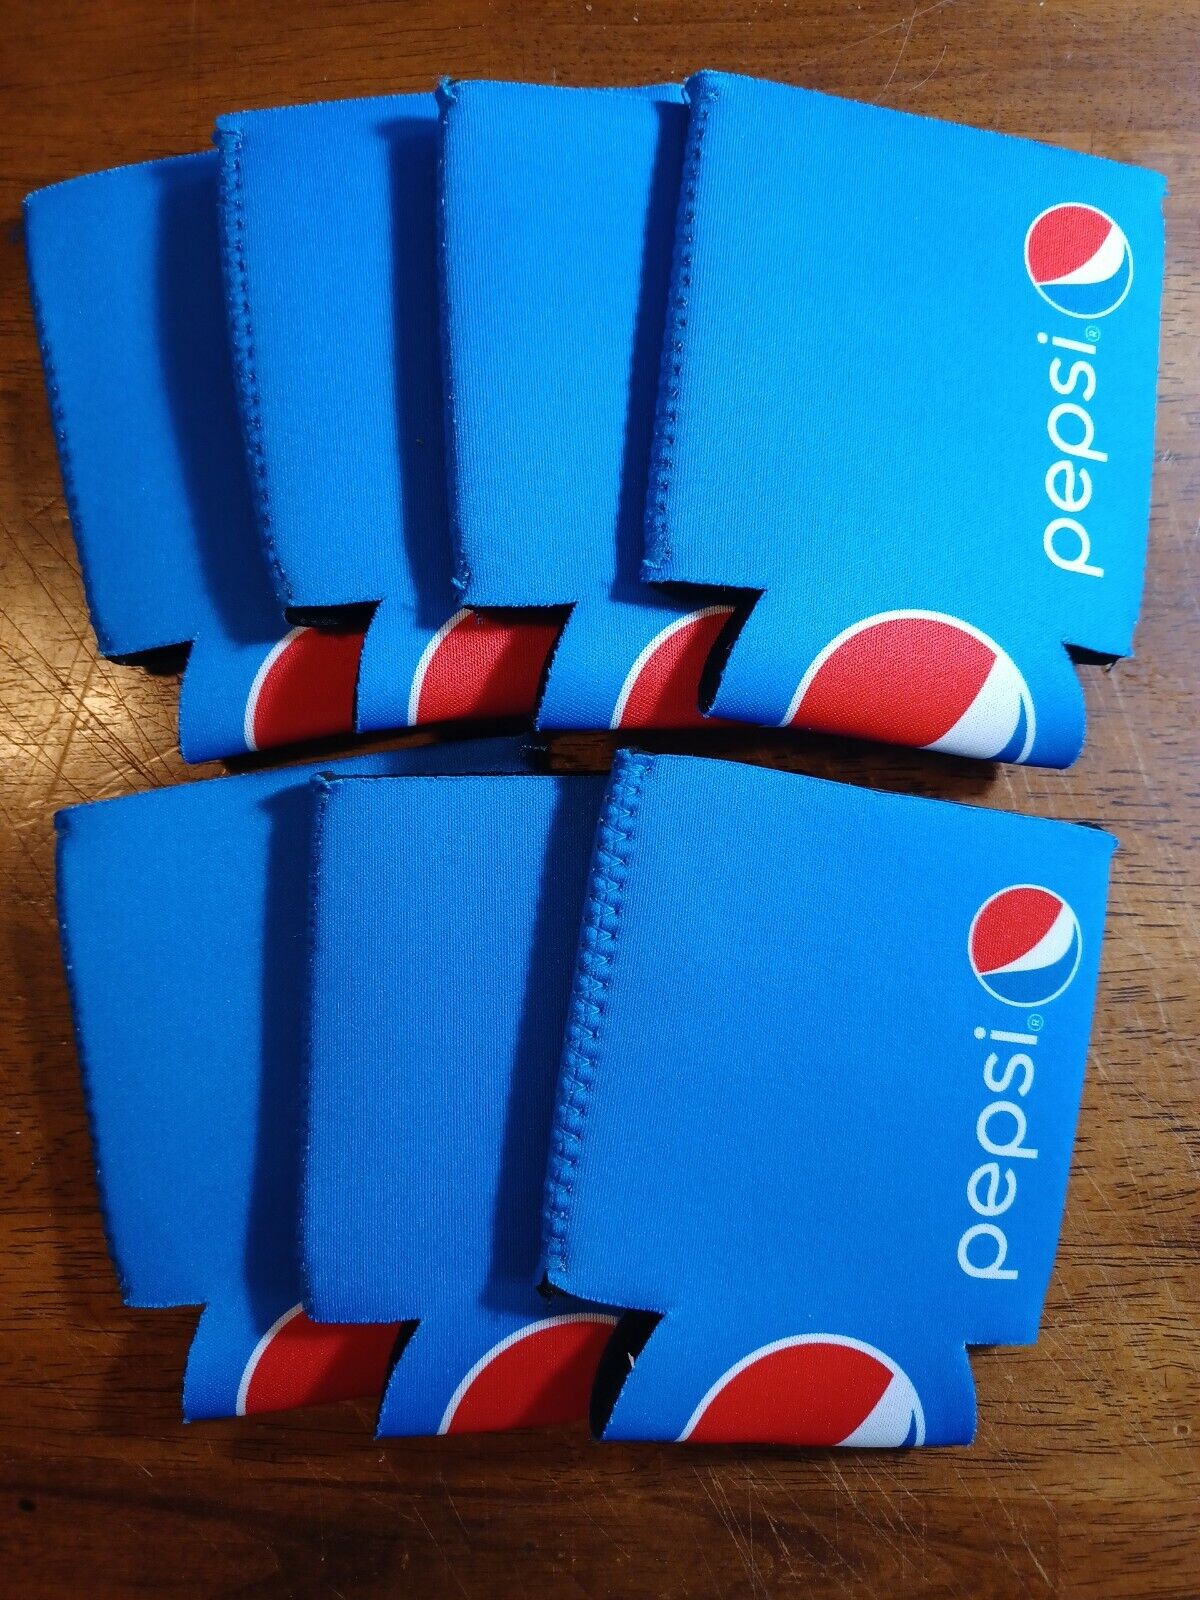 5 for $1 Pepsi Cola Can Koozie